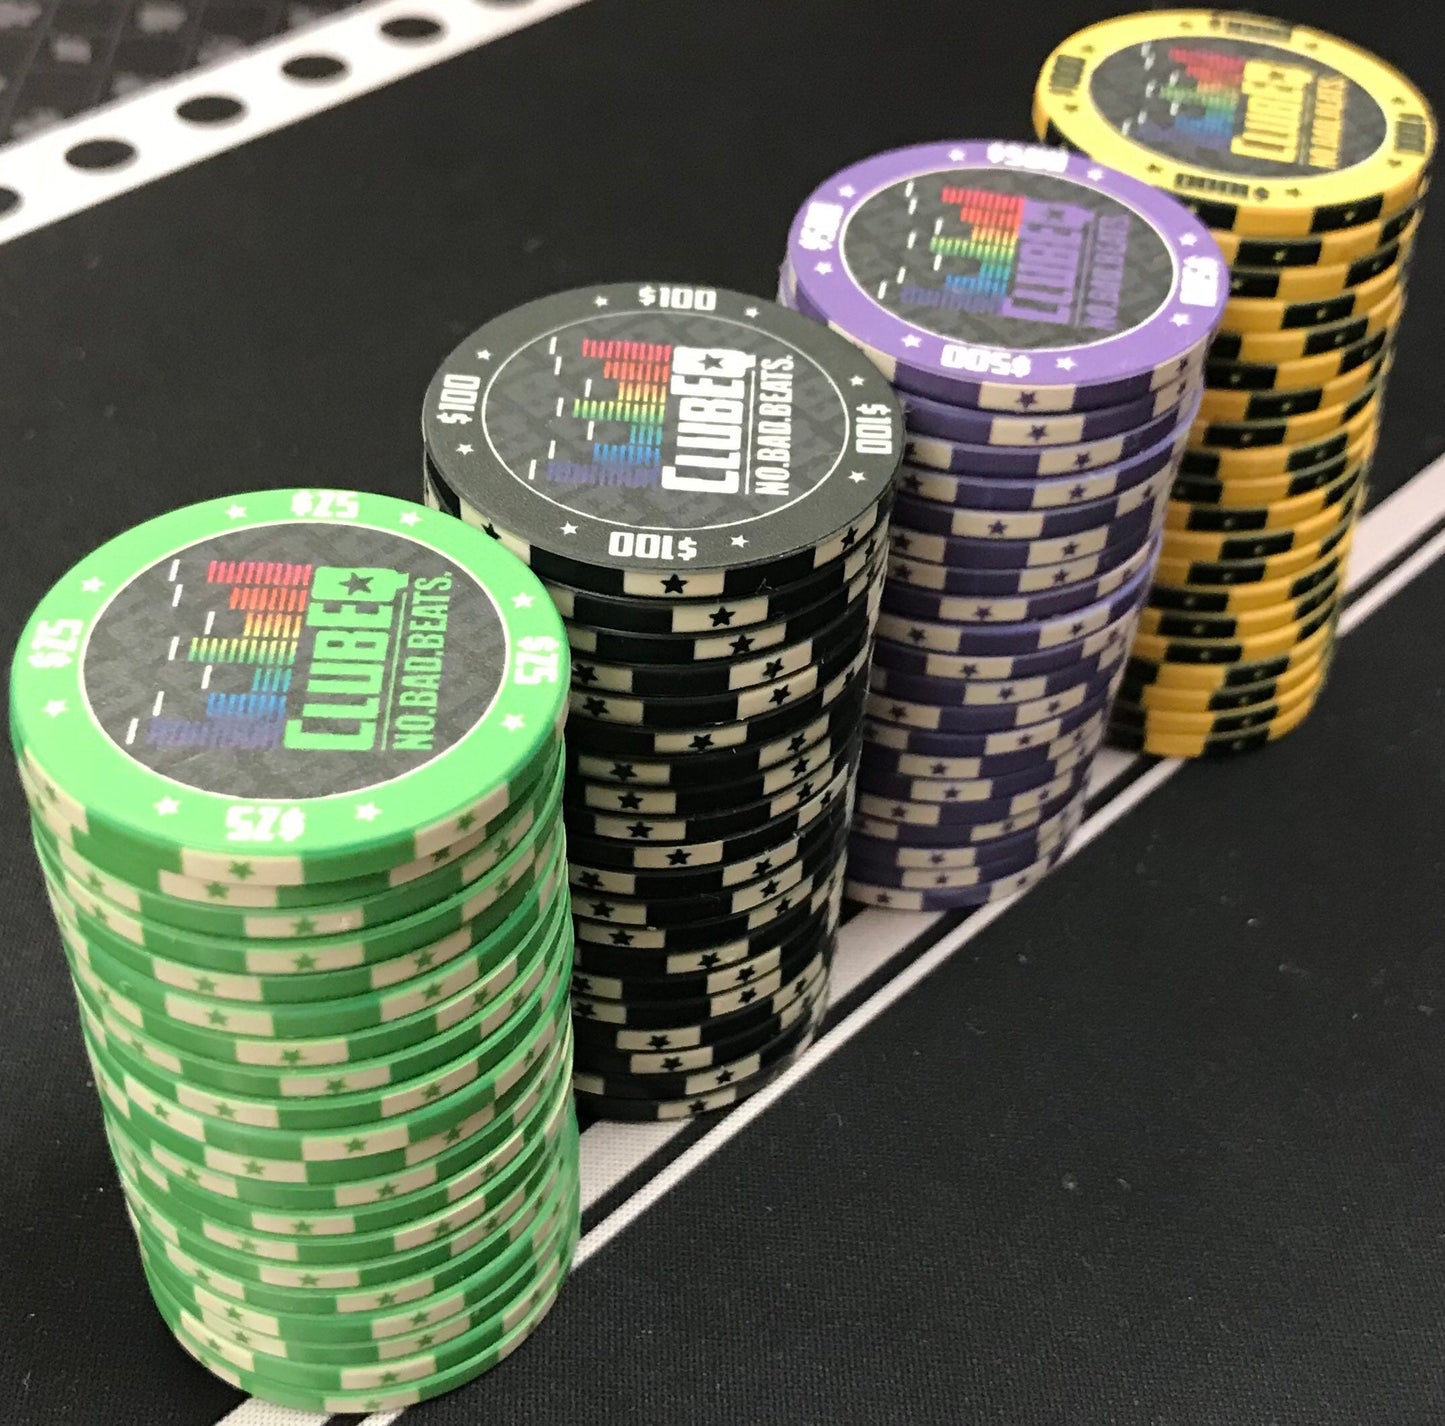 Four stacks of 20 ClubEQ designer poker chips. The ClubEQ green $25, black $100, purple $500, and yellow $1000 poker chips. (Green, black, purple, yellow.) If you're looking for unique poker chips, these are the answer.